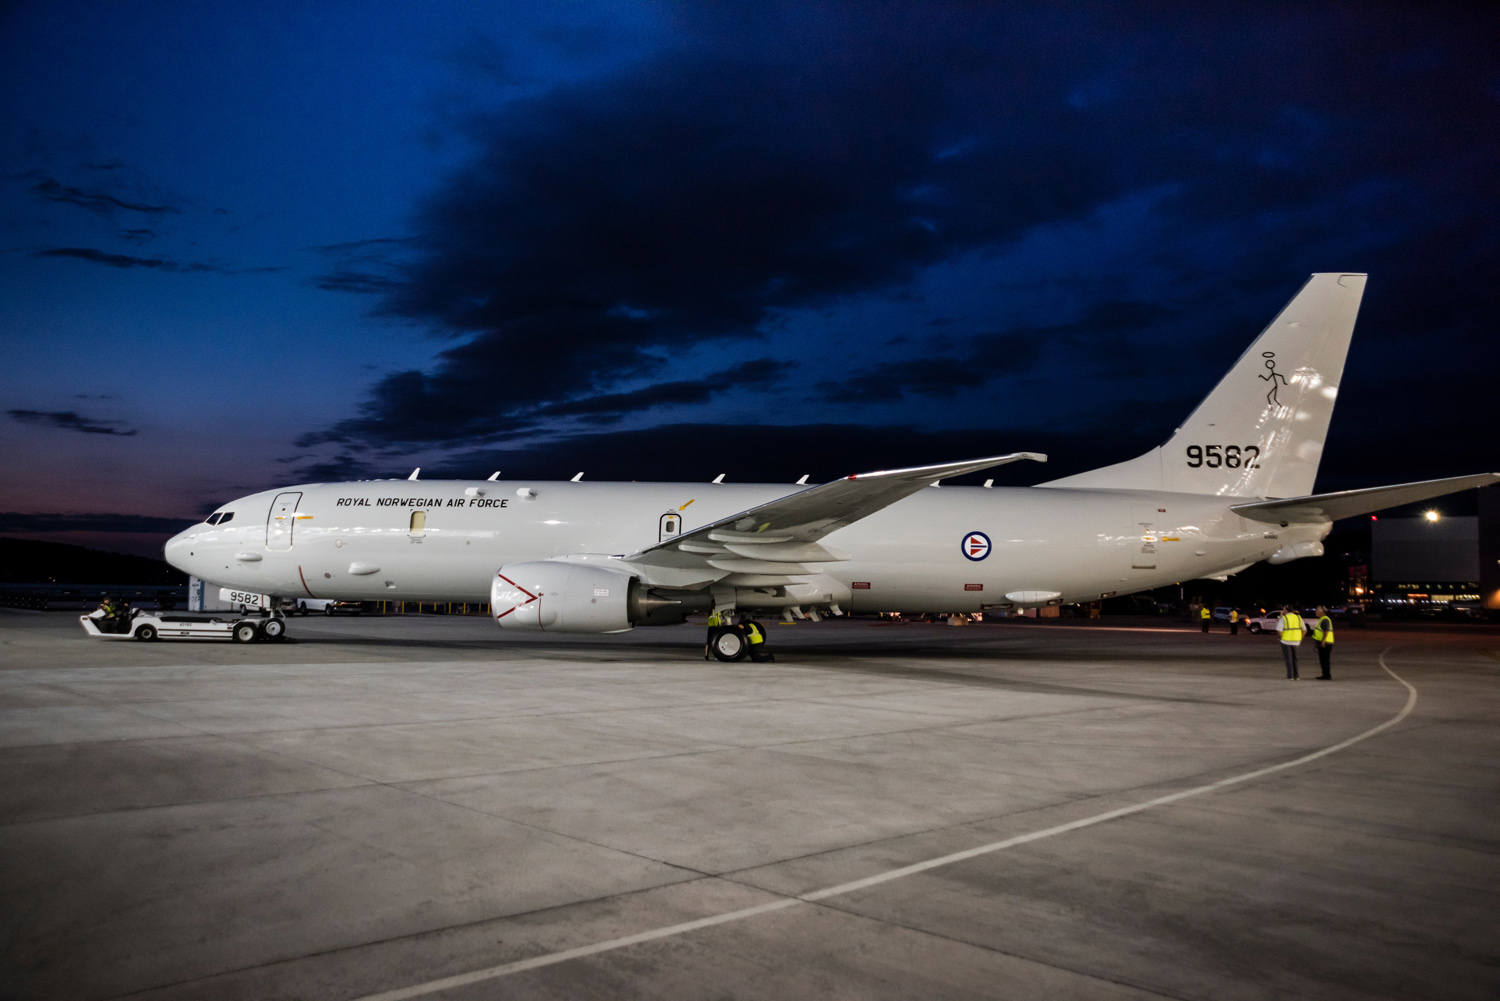 Royal Norwegian Air Force's First Boeing P-8A Poseidon Rolls Out of the Paint Shop